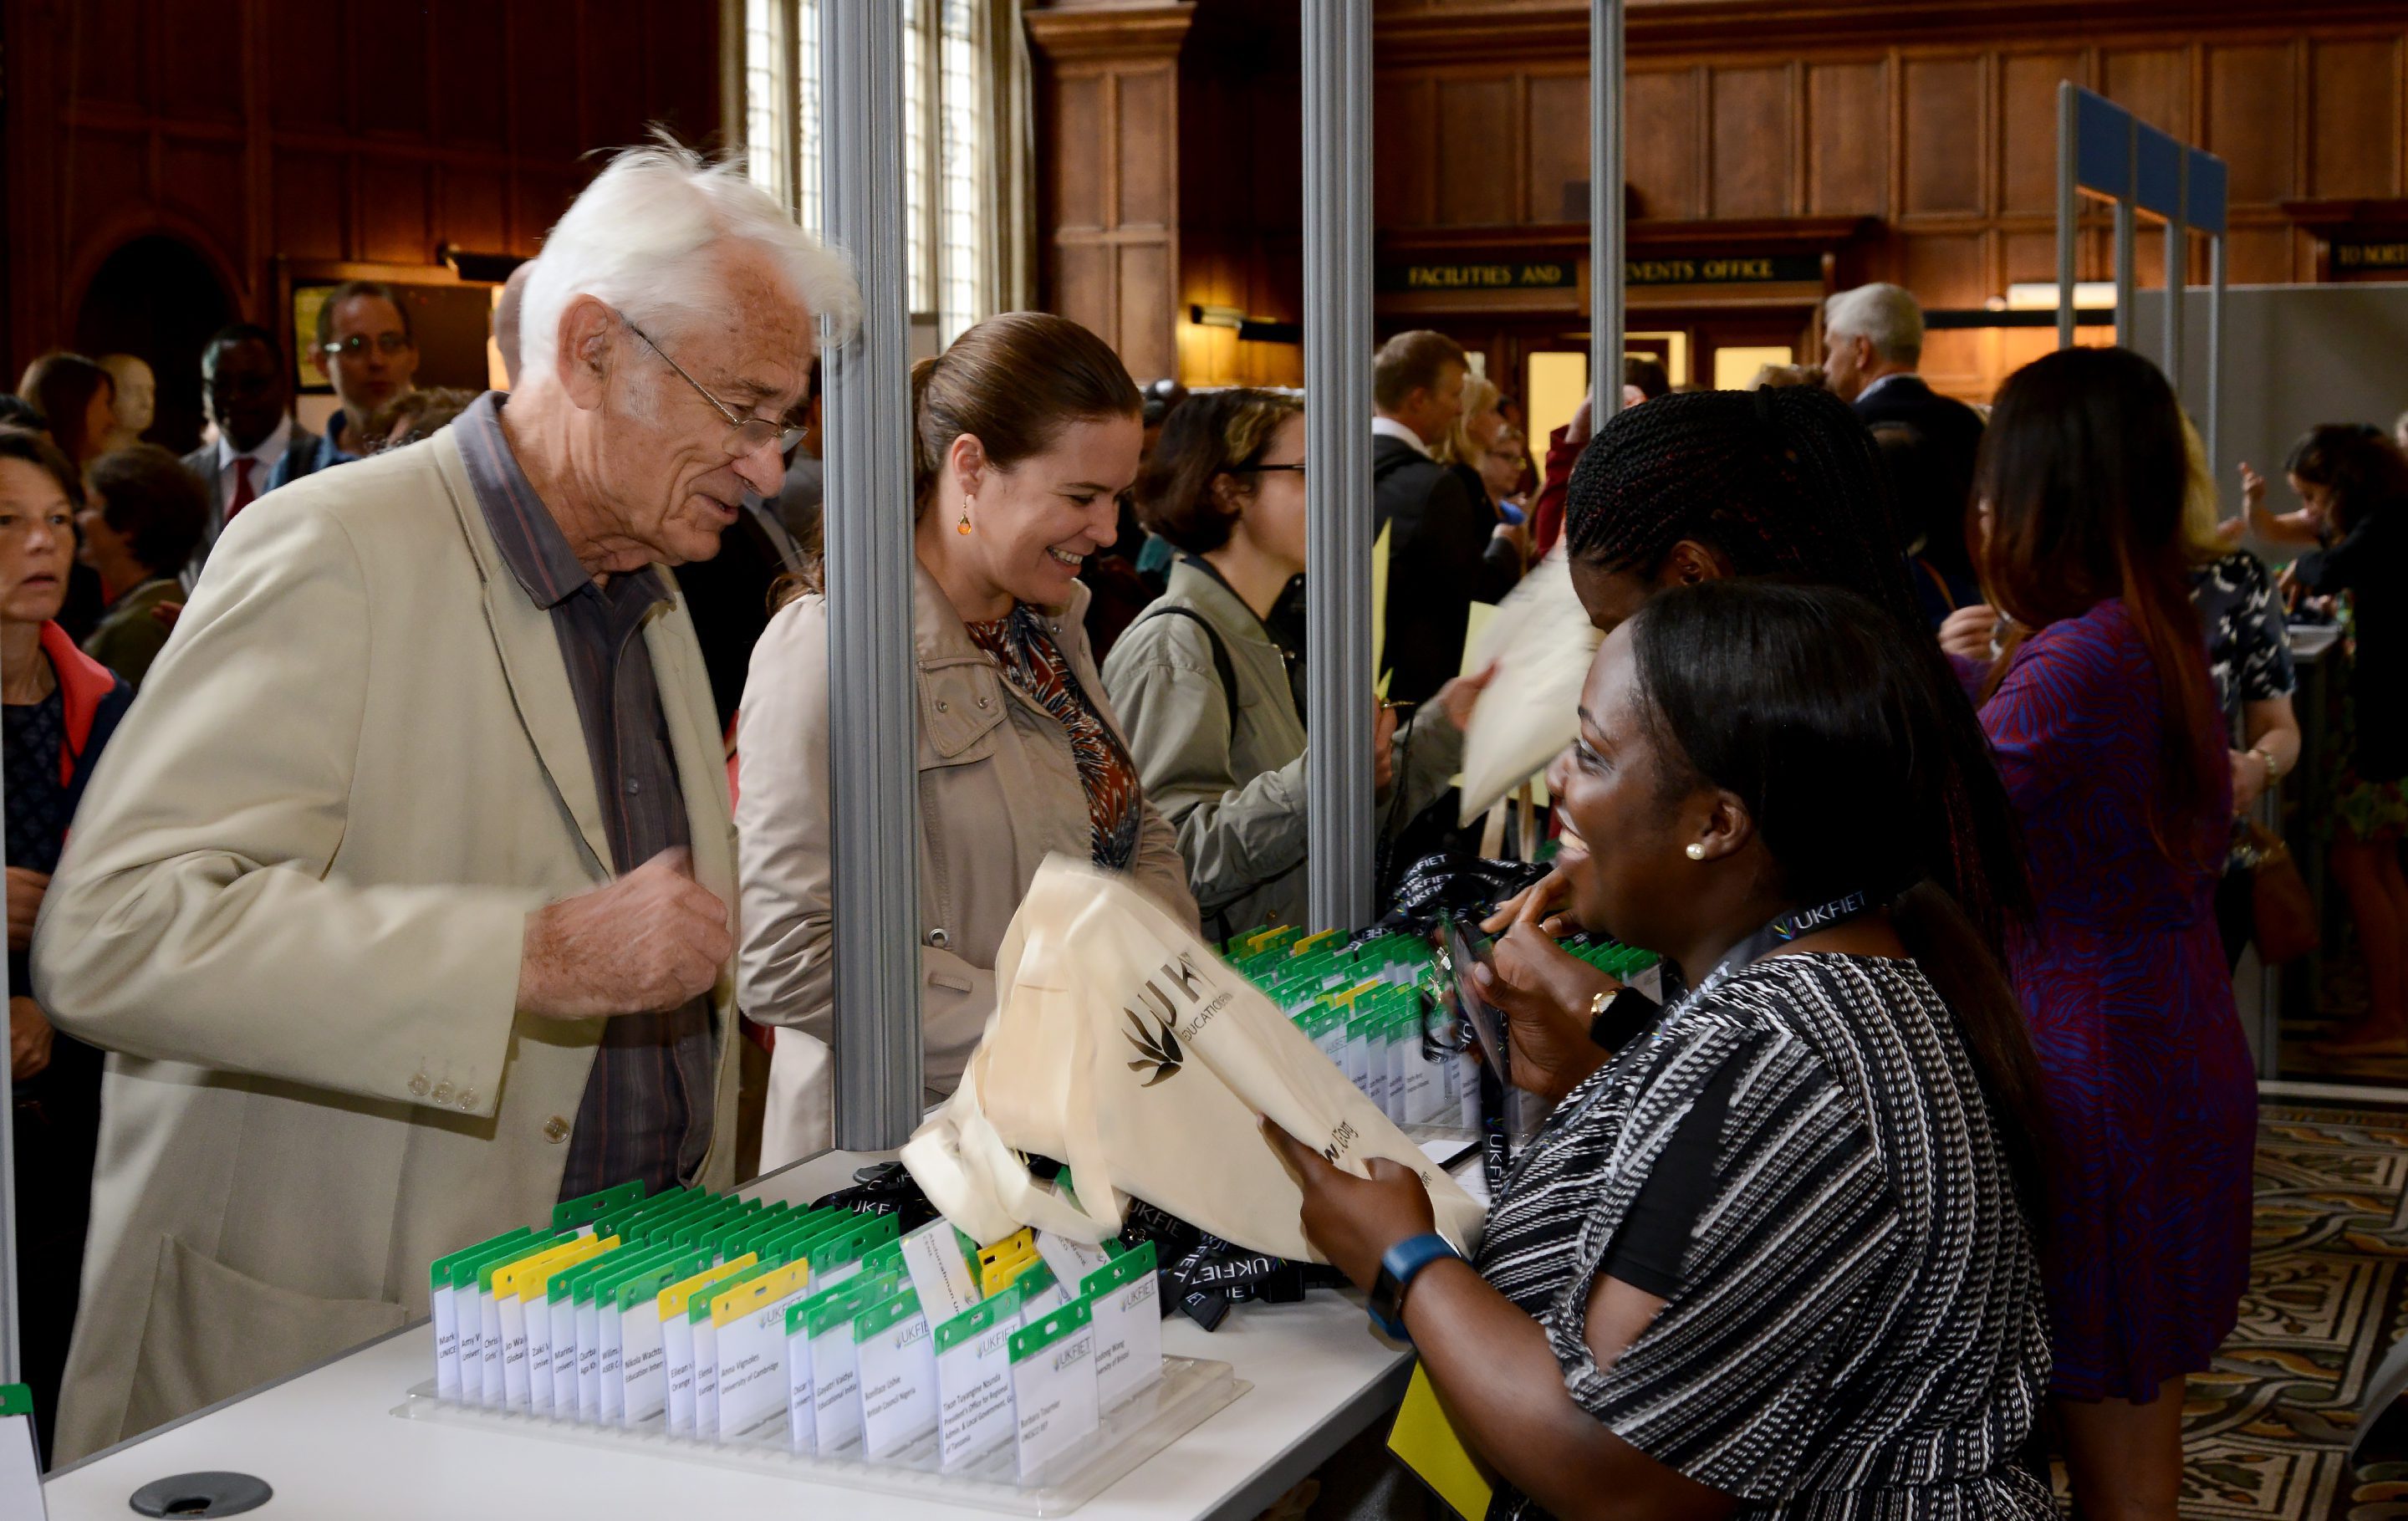 Delegates registering on arrival at the conference in Oxford